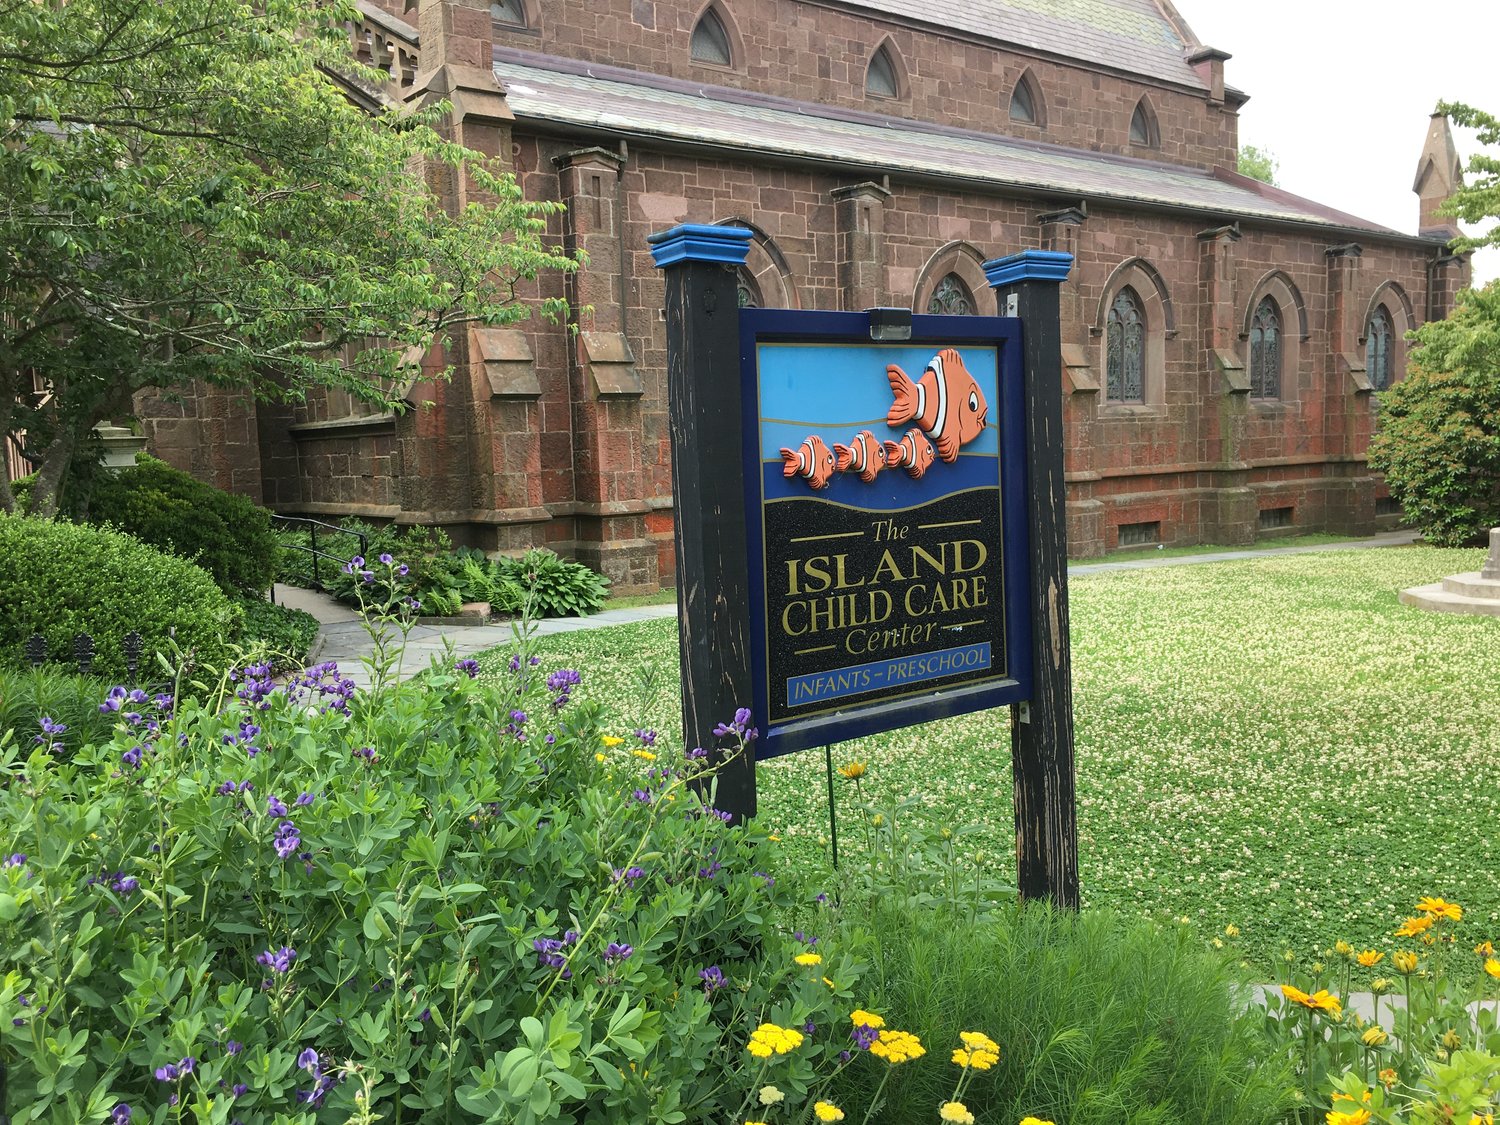 The Island Child Care Center, located in a building owned by St. Michael’s Church, is facing an uncertain future after the Rev. Michael Horvath notified the owner that the church wants them to vacate their space.